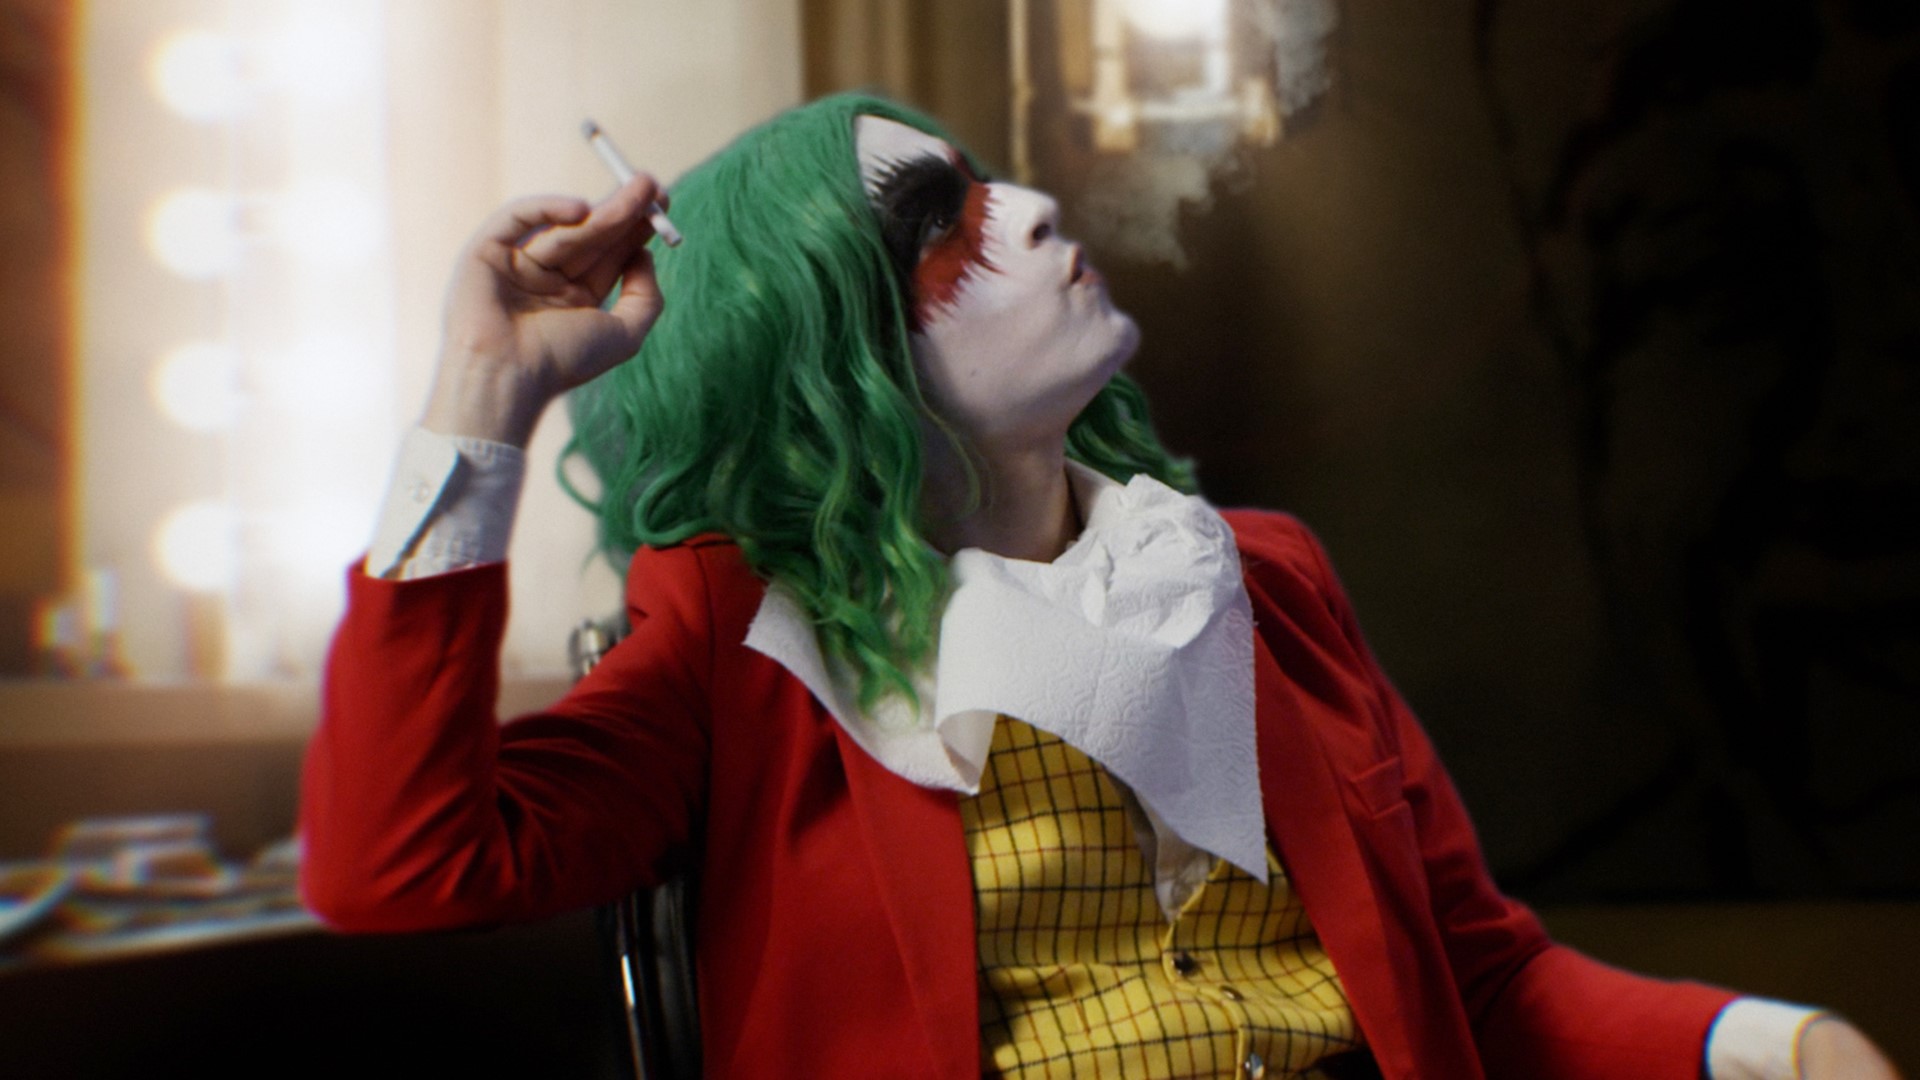 In "The People's Joker," a painfully unfunny aspiring clown grapples with her gender identity while trying to join the cast of Gotham City's sketch comedy program.